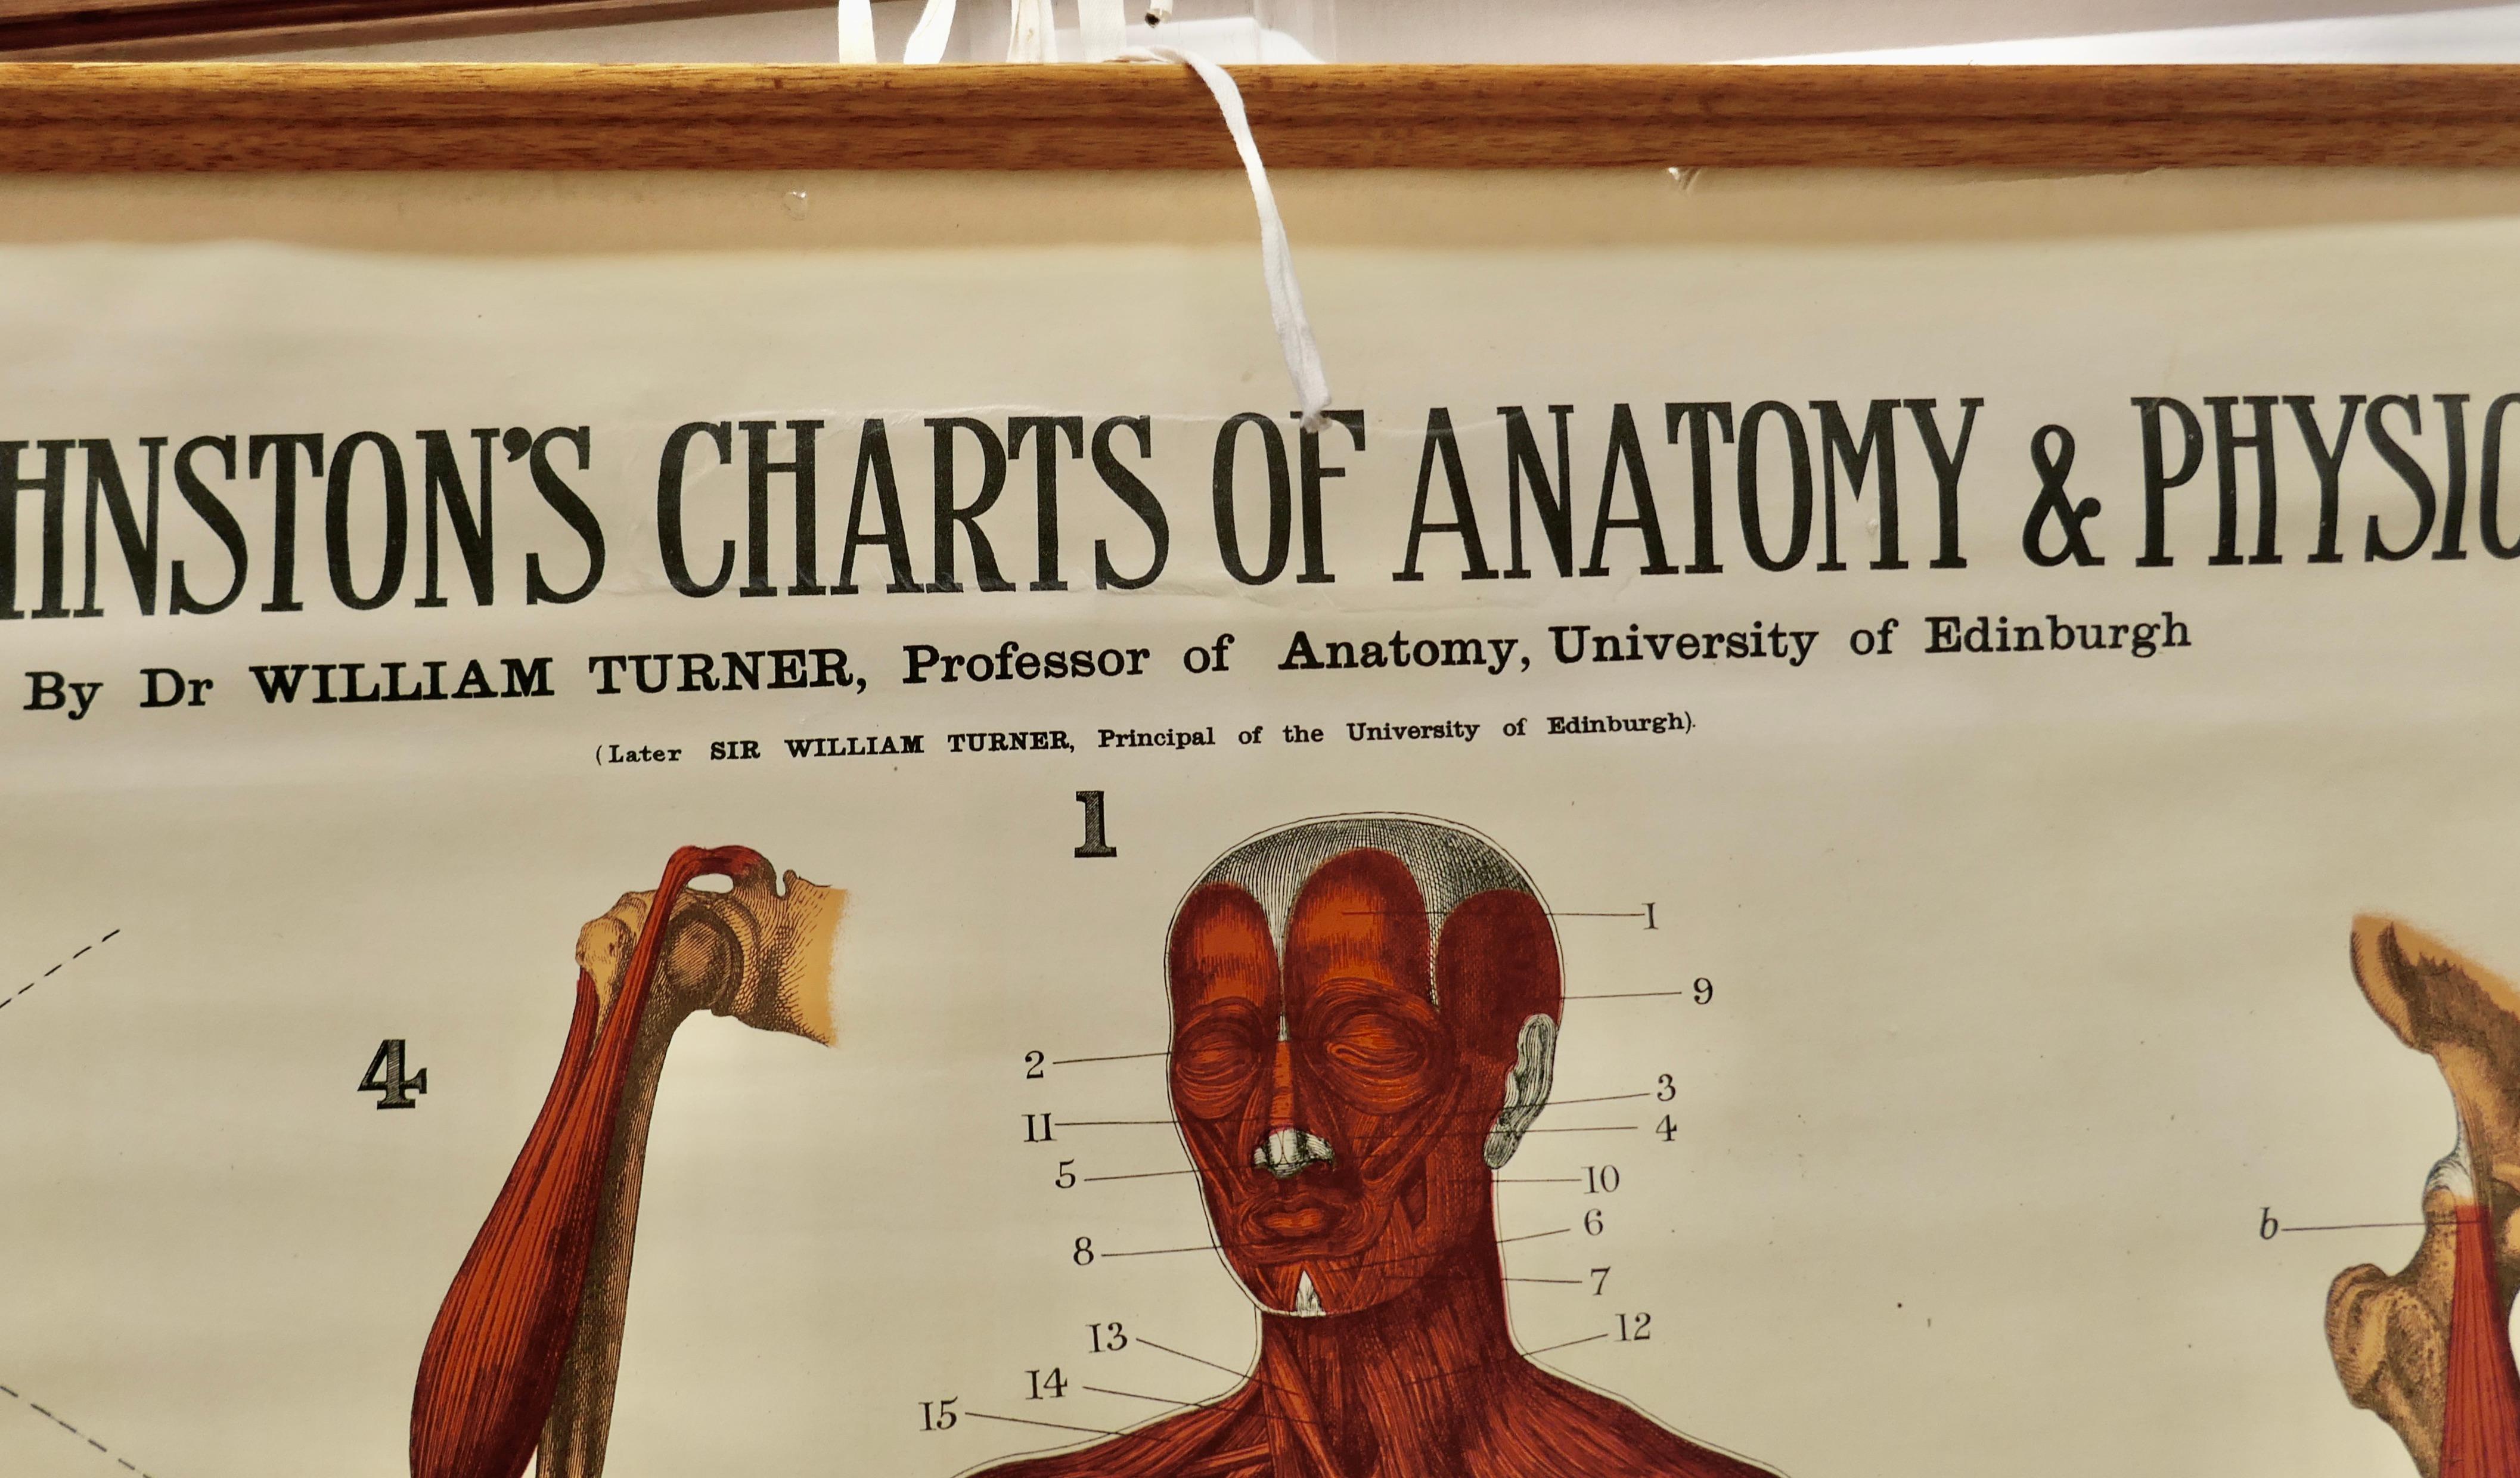 Large University Anatomical Chart “Muscles” by Turner In Good Condition For Sale In Chillerton, Isle of Wight